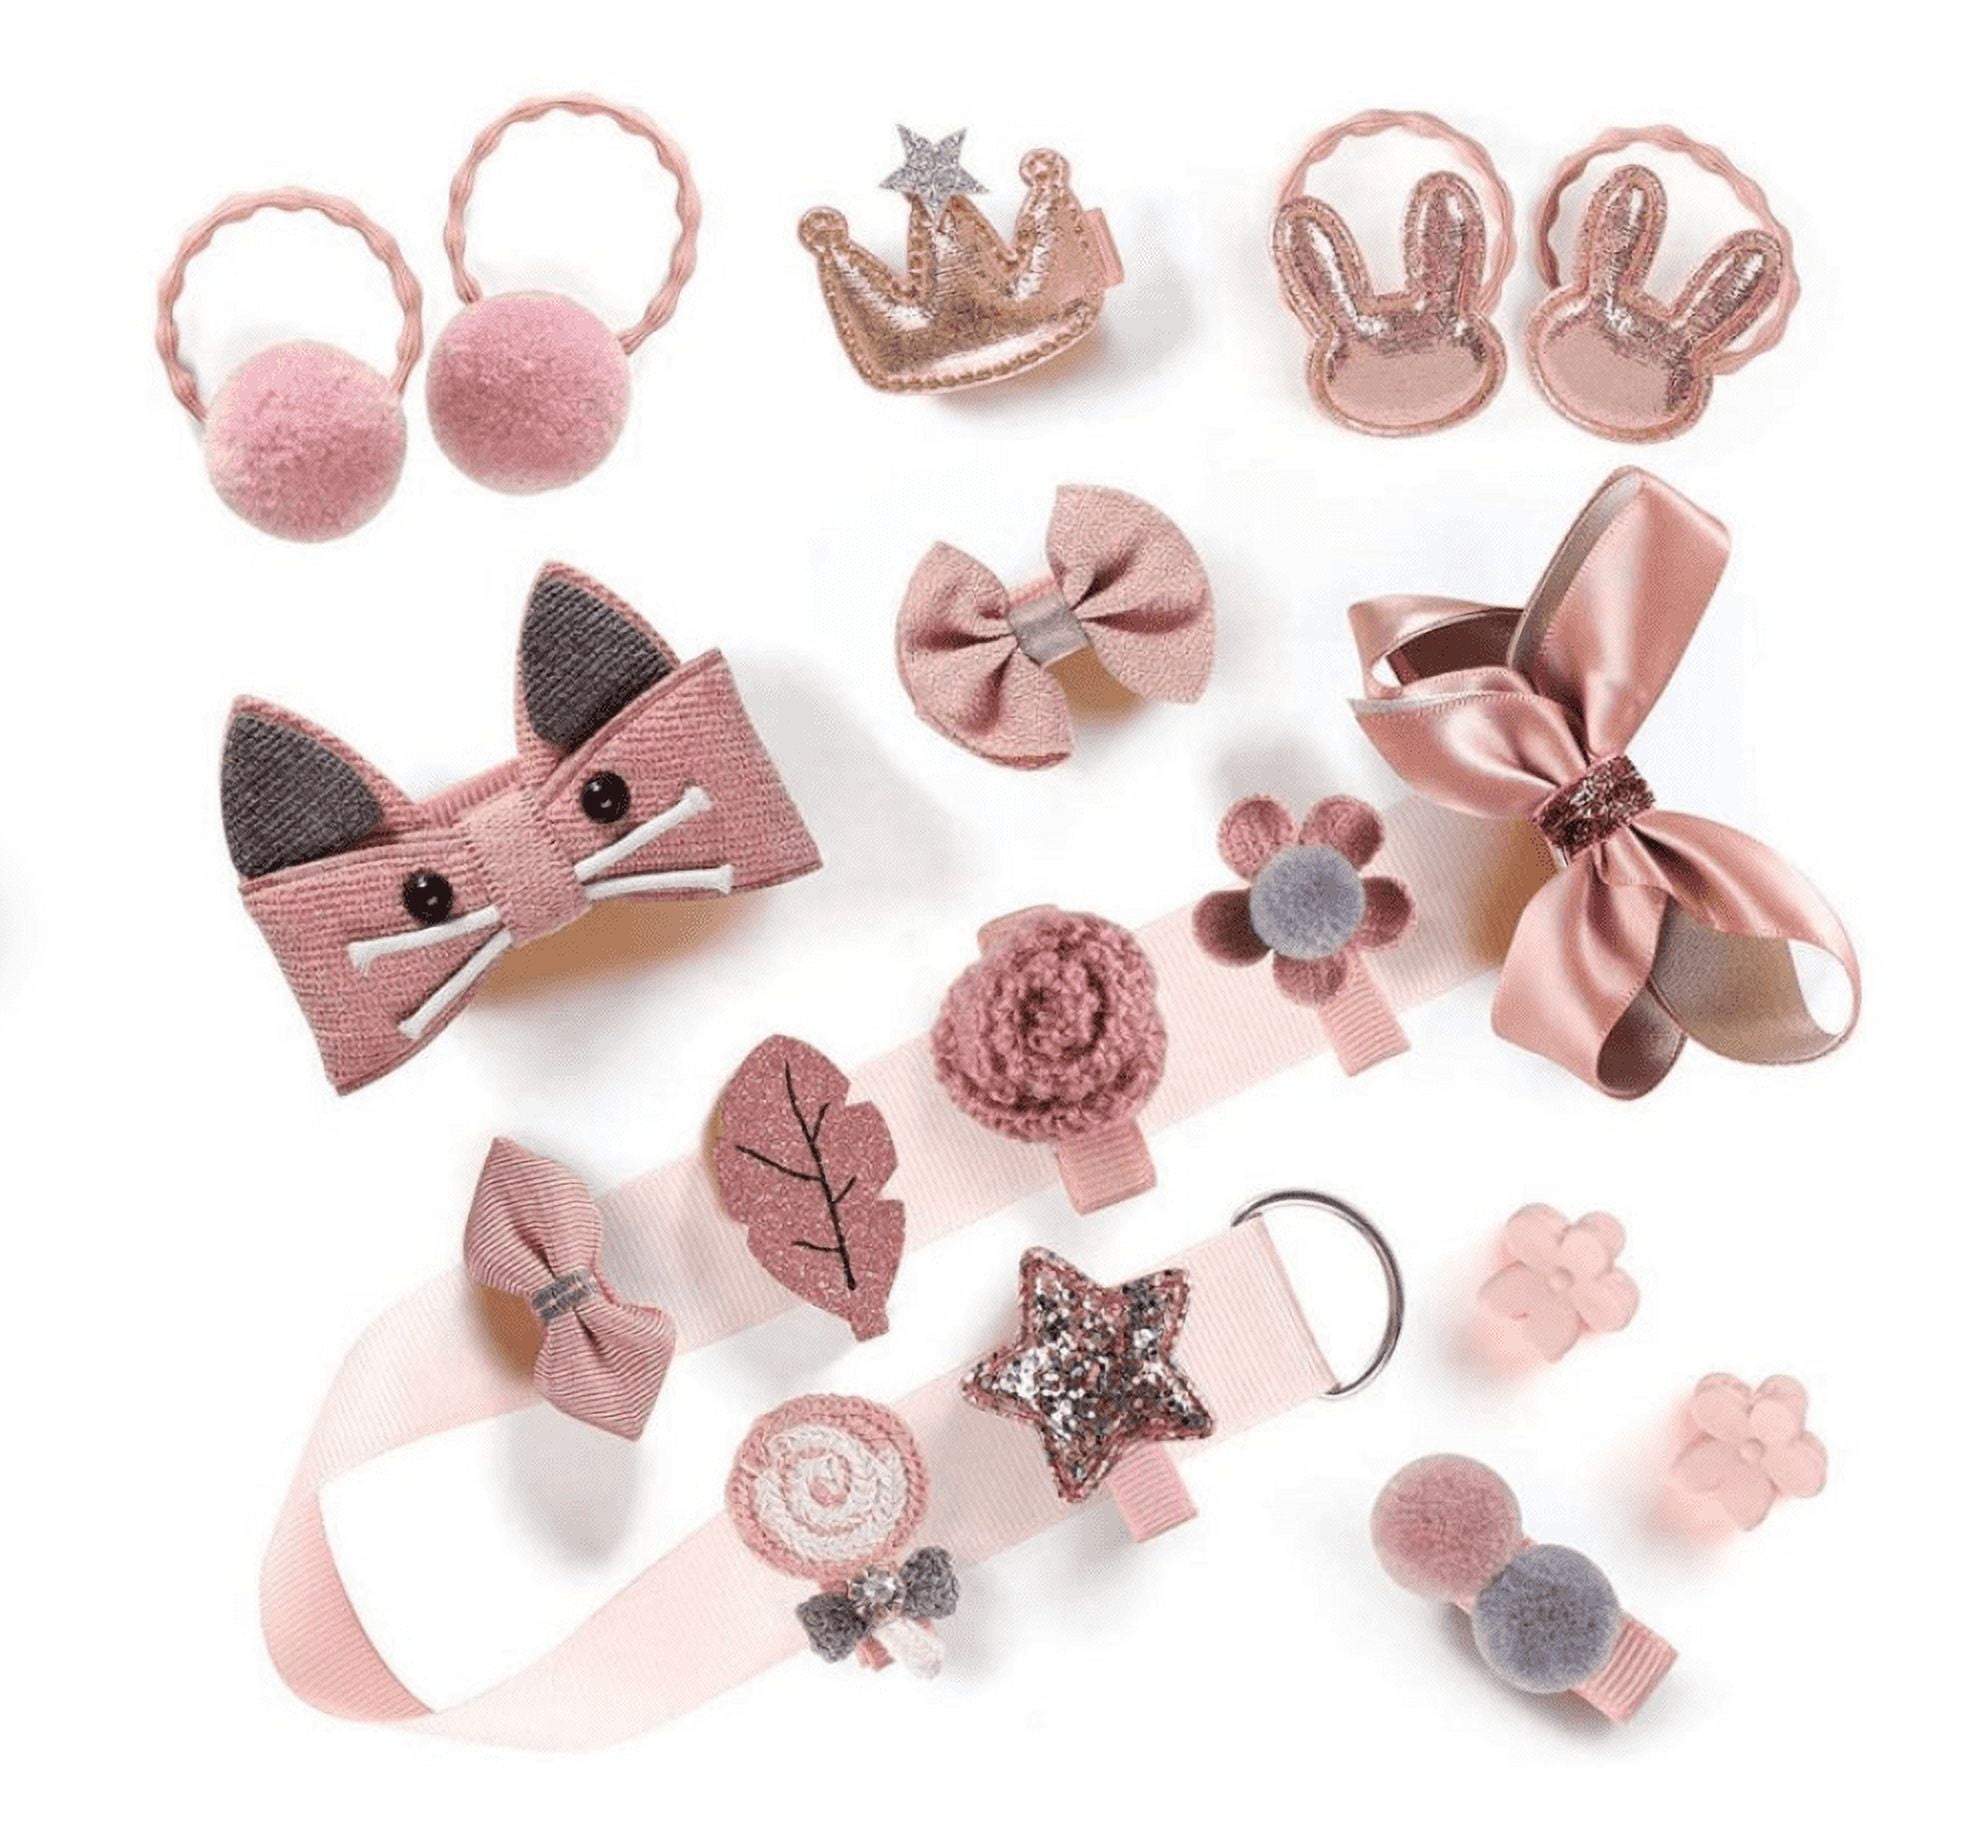 CHL-STORE Infant Hair Clips: Cute Cloth Hair Accessories for Babies Pink Crown Strawberry